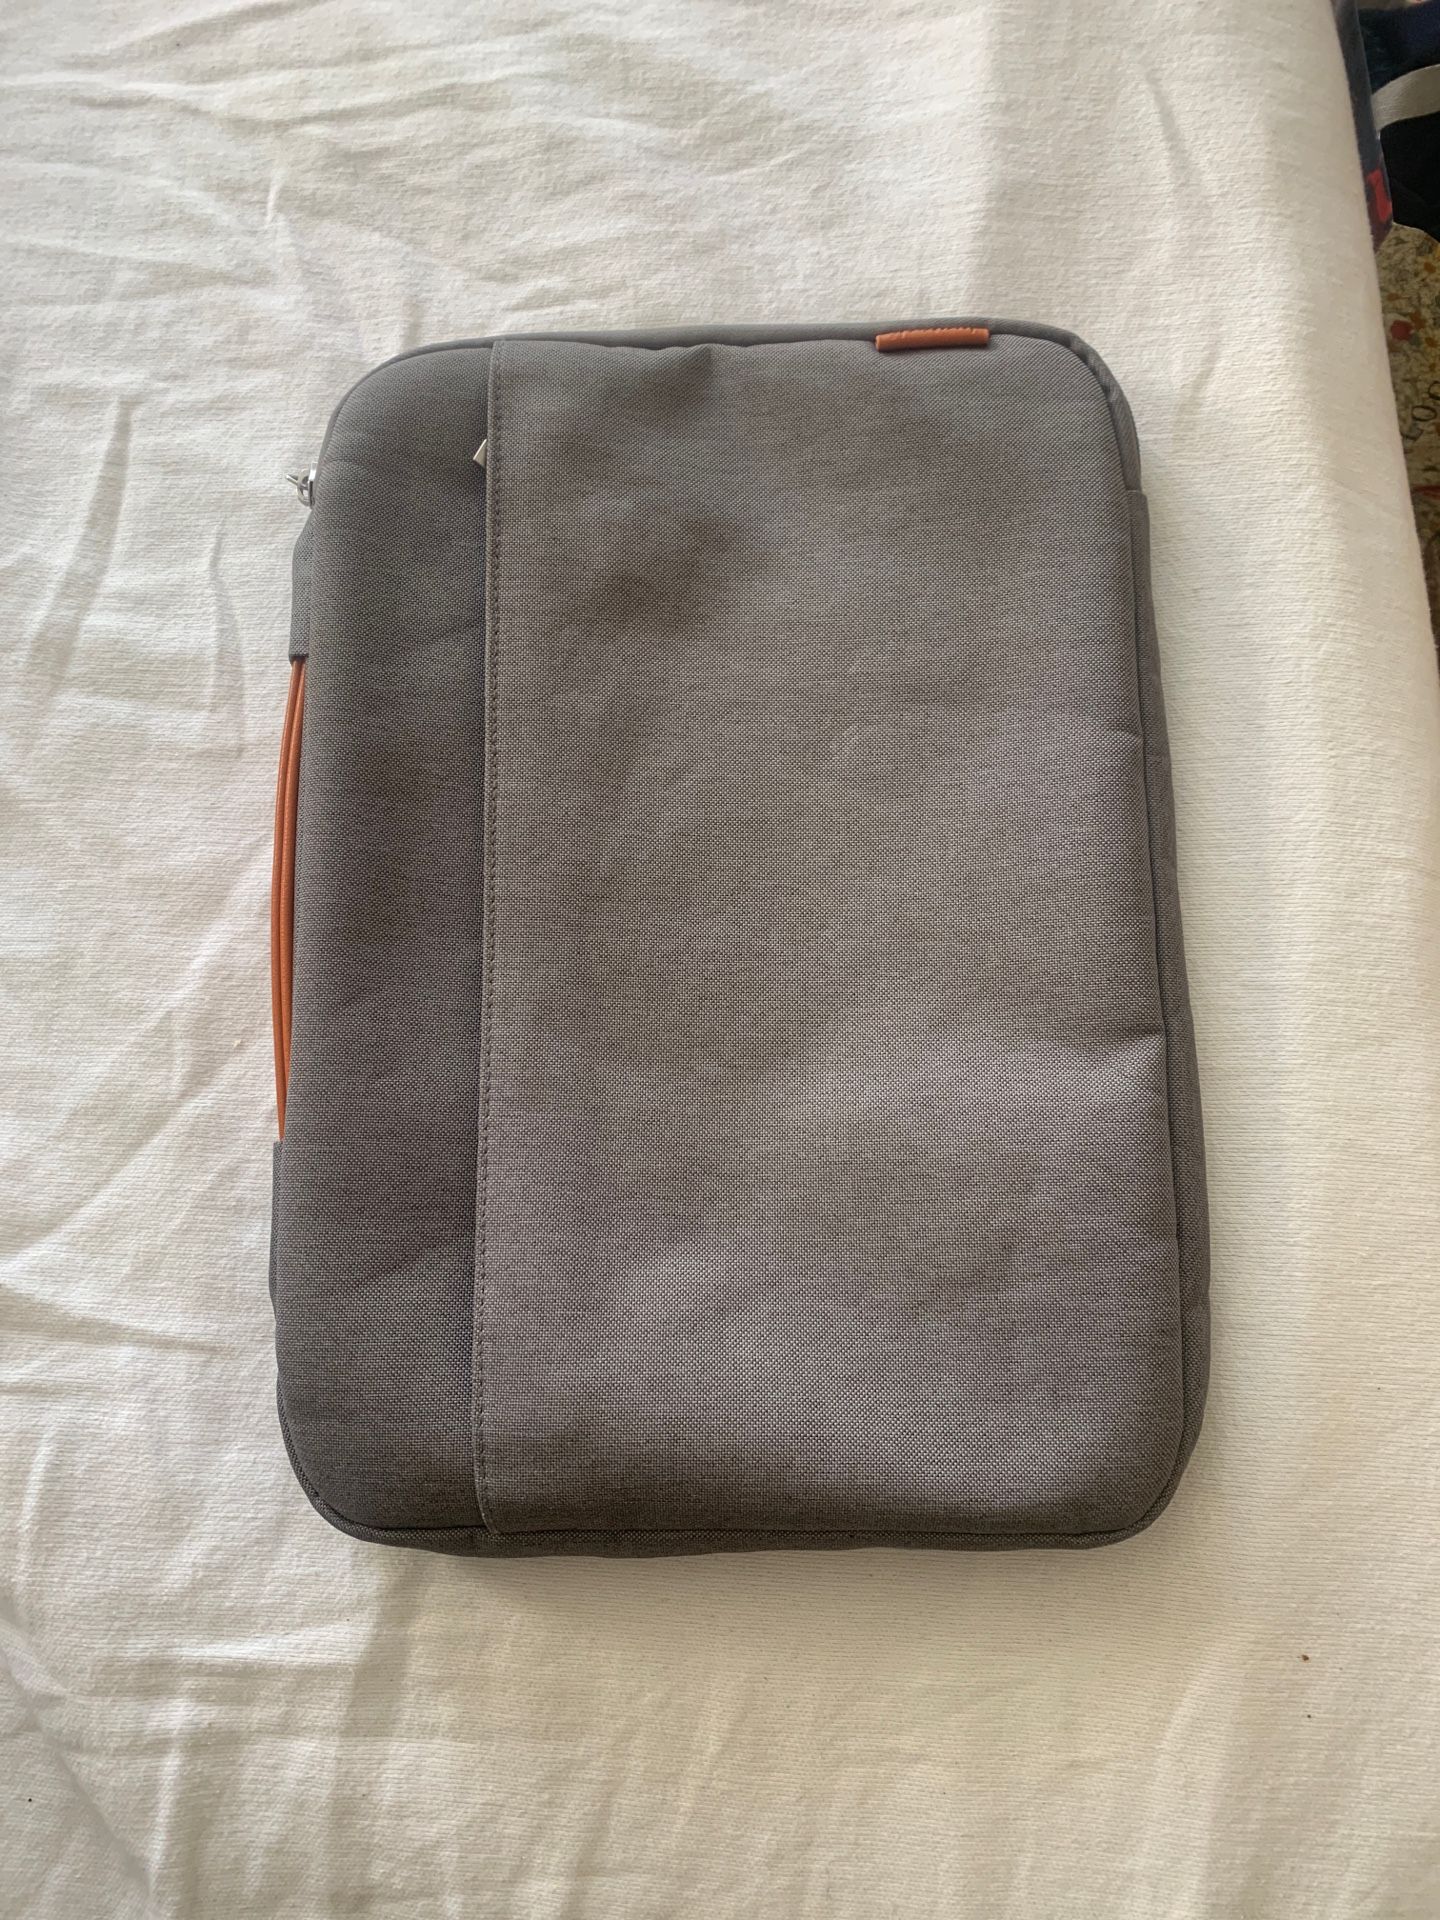 Inateck 13” laptop case/sleeve